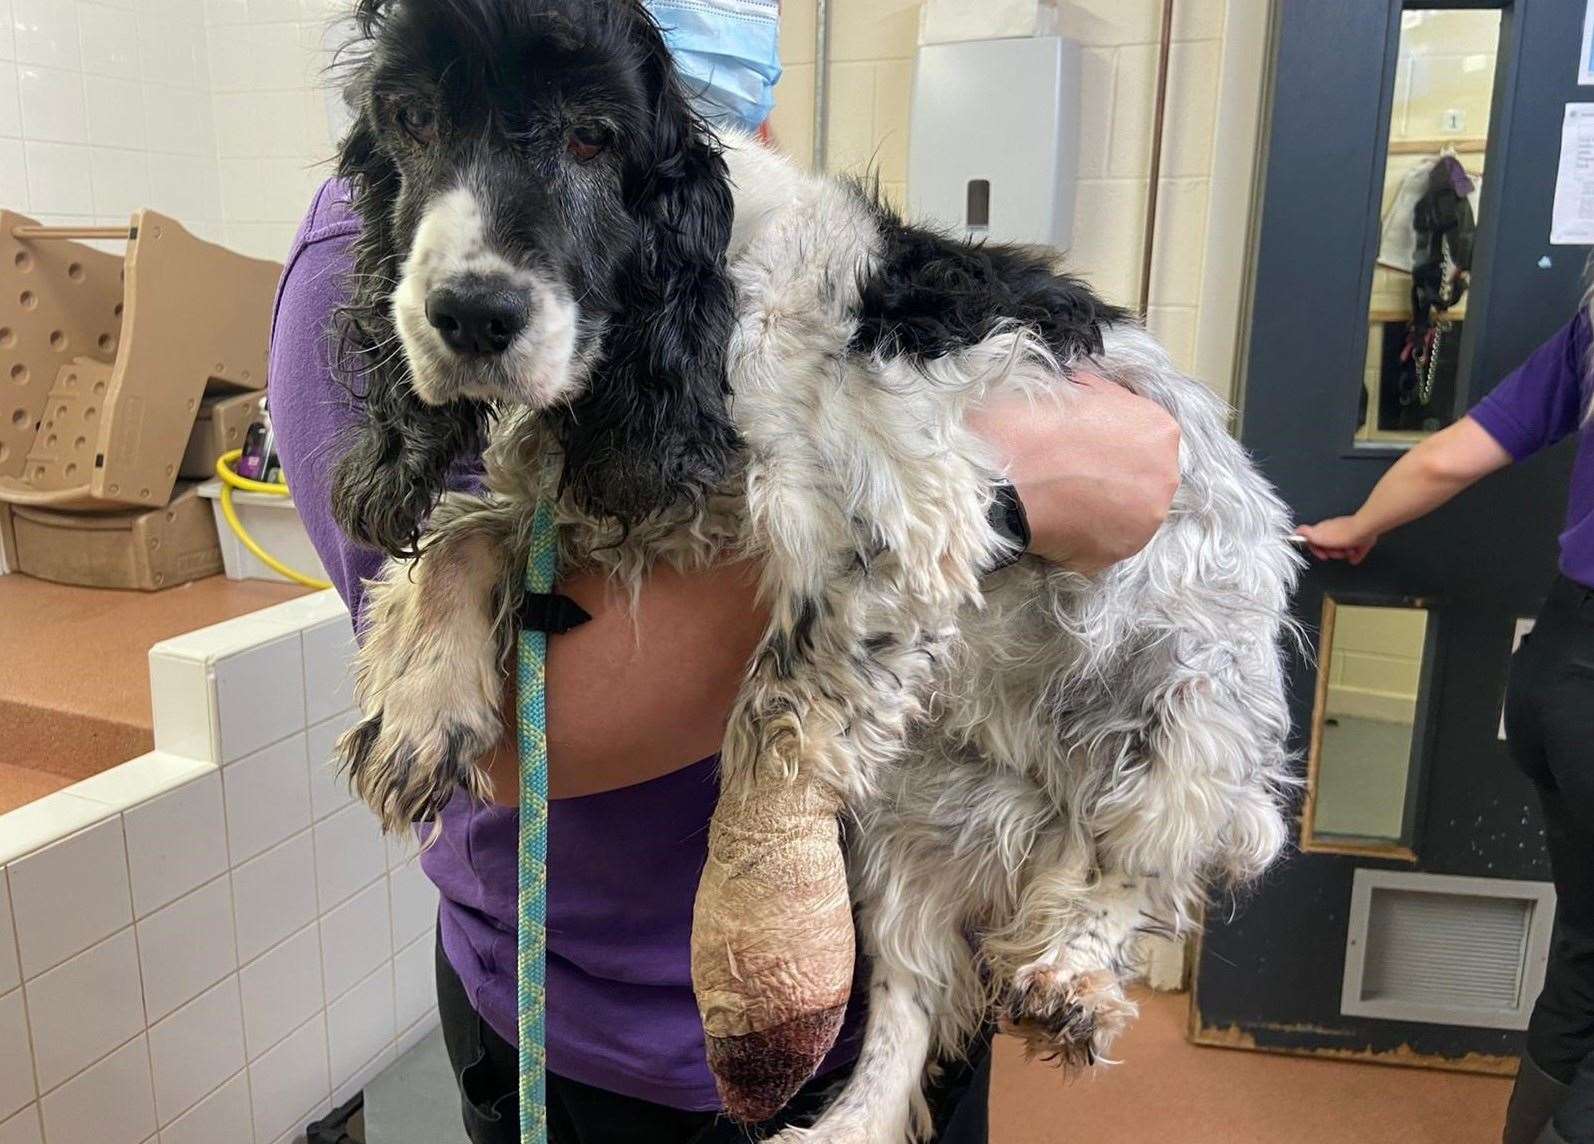 Animal welfare charity appeals for information after dog found abandoned